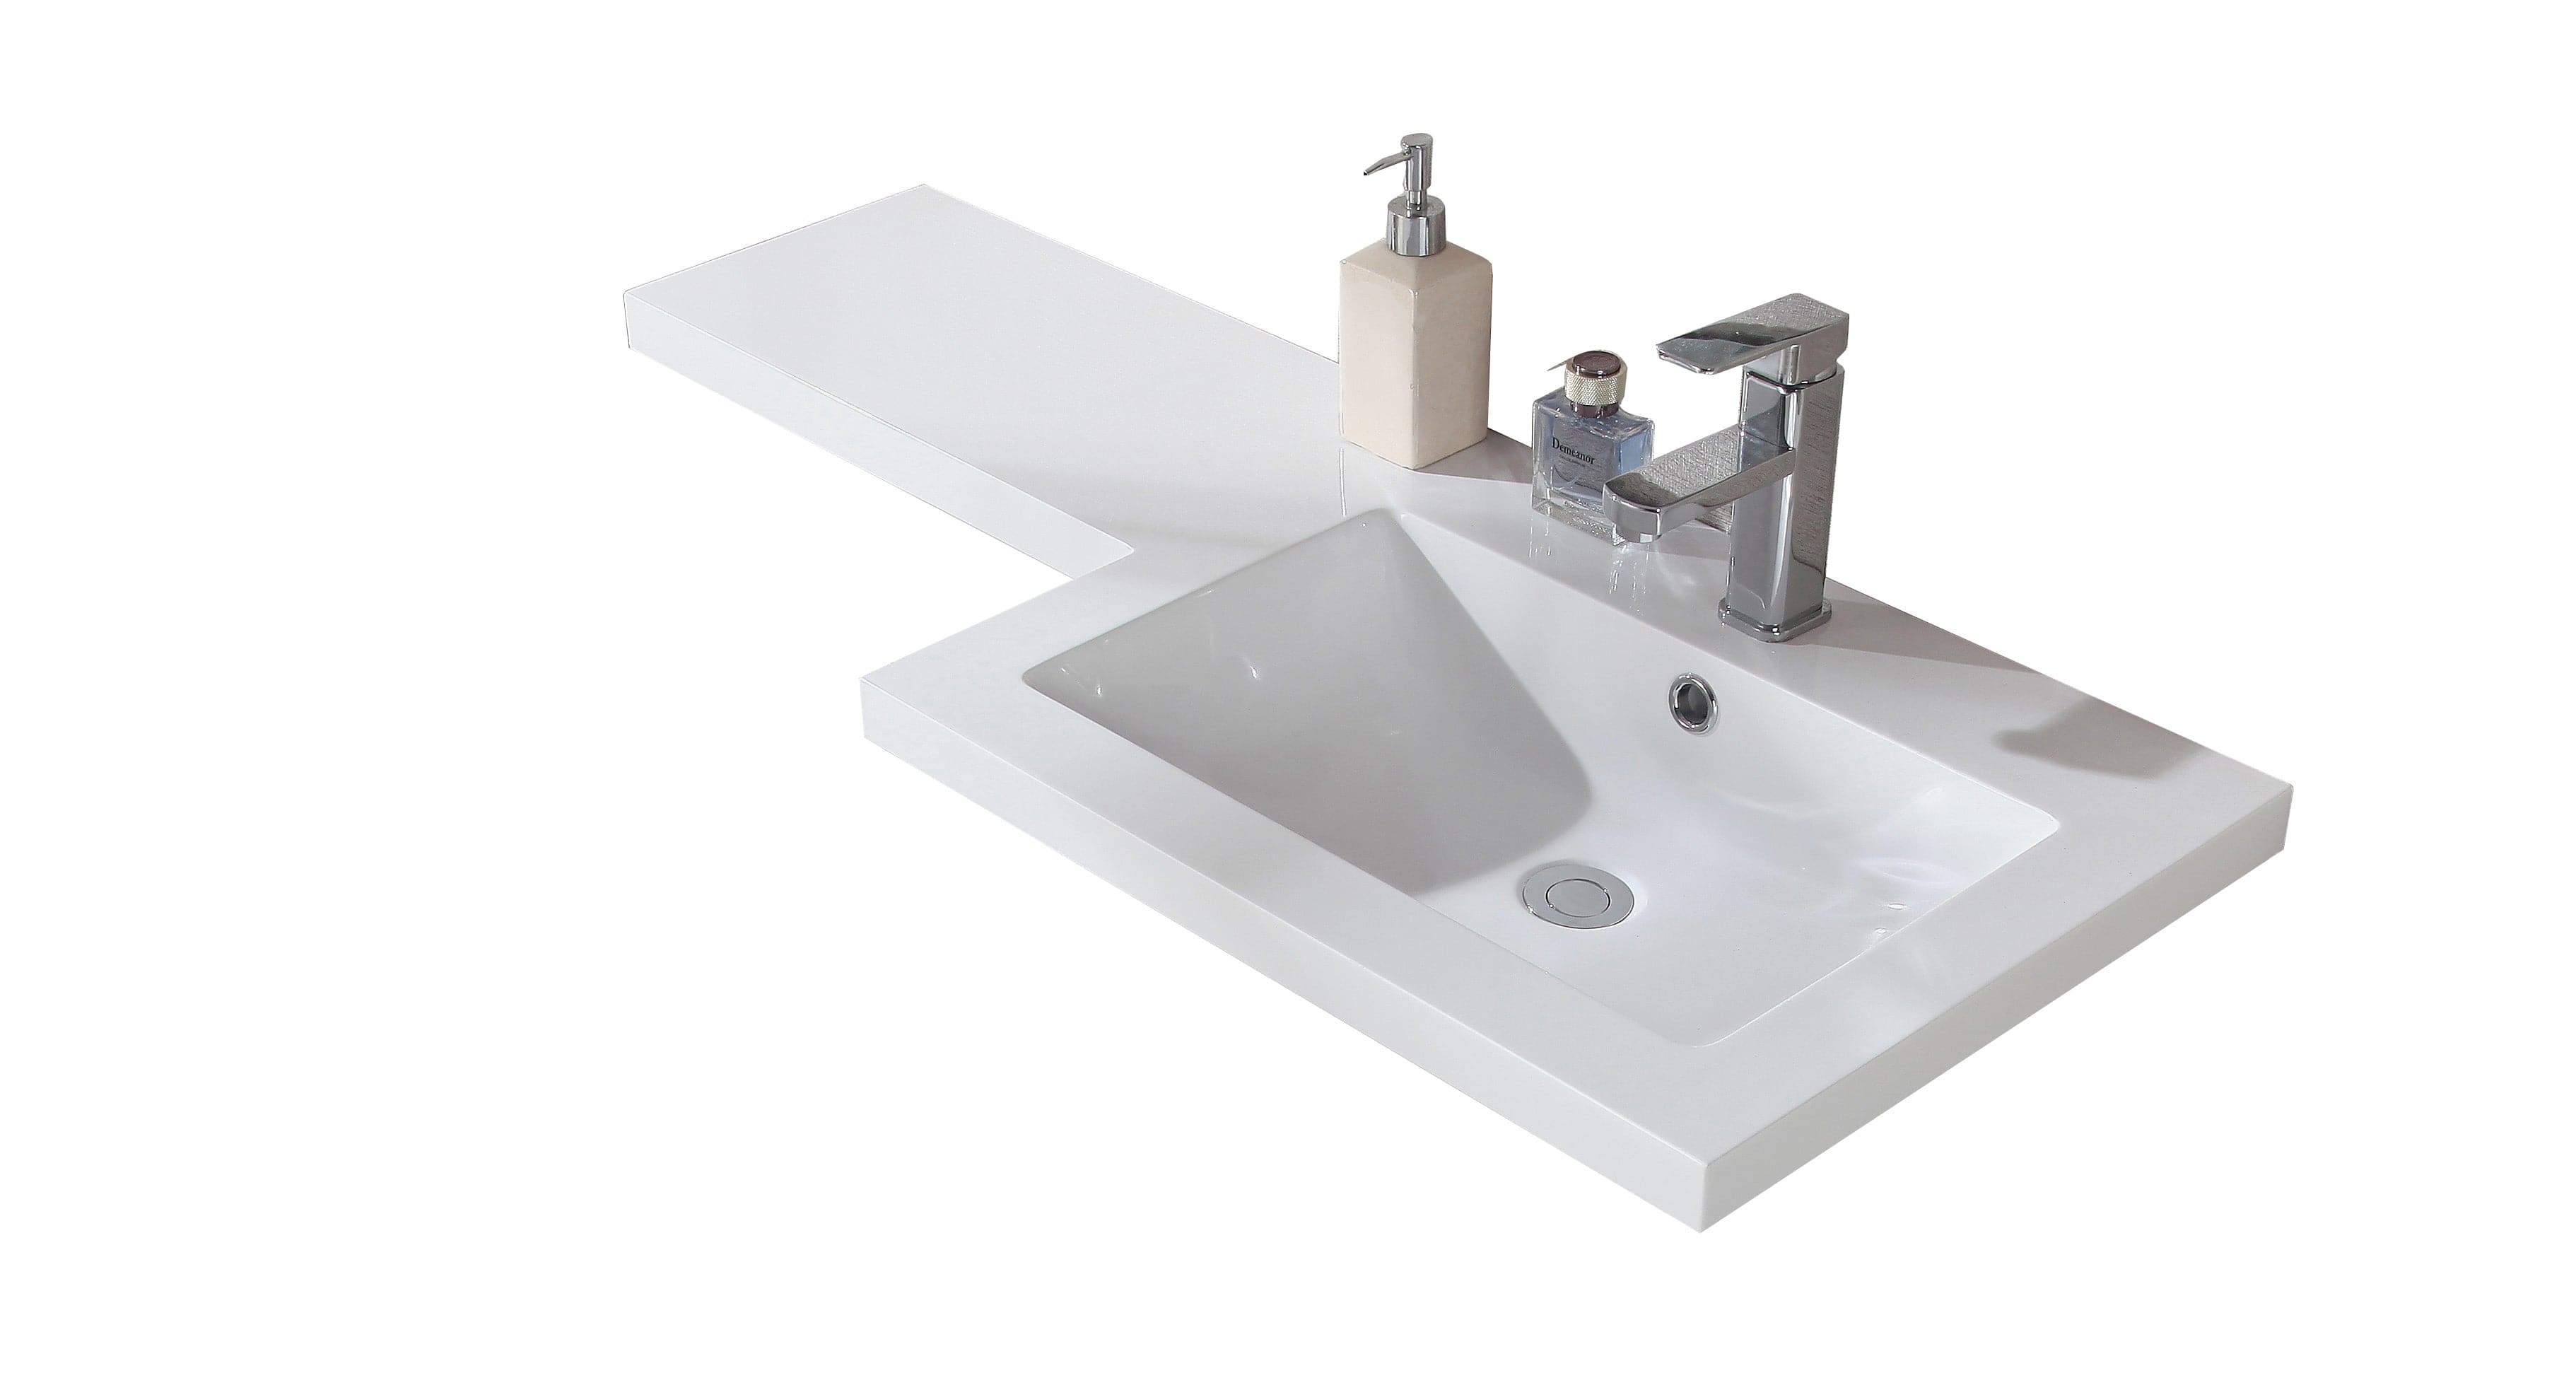 Gamma L Shape Vanity & WC Unit with Toilet - RH - Gloss White, sleek modern design, space-saving solution, perfect for contemporary UK bathrooms - bathroom4less.co.uk